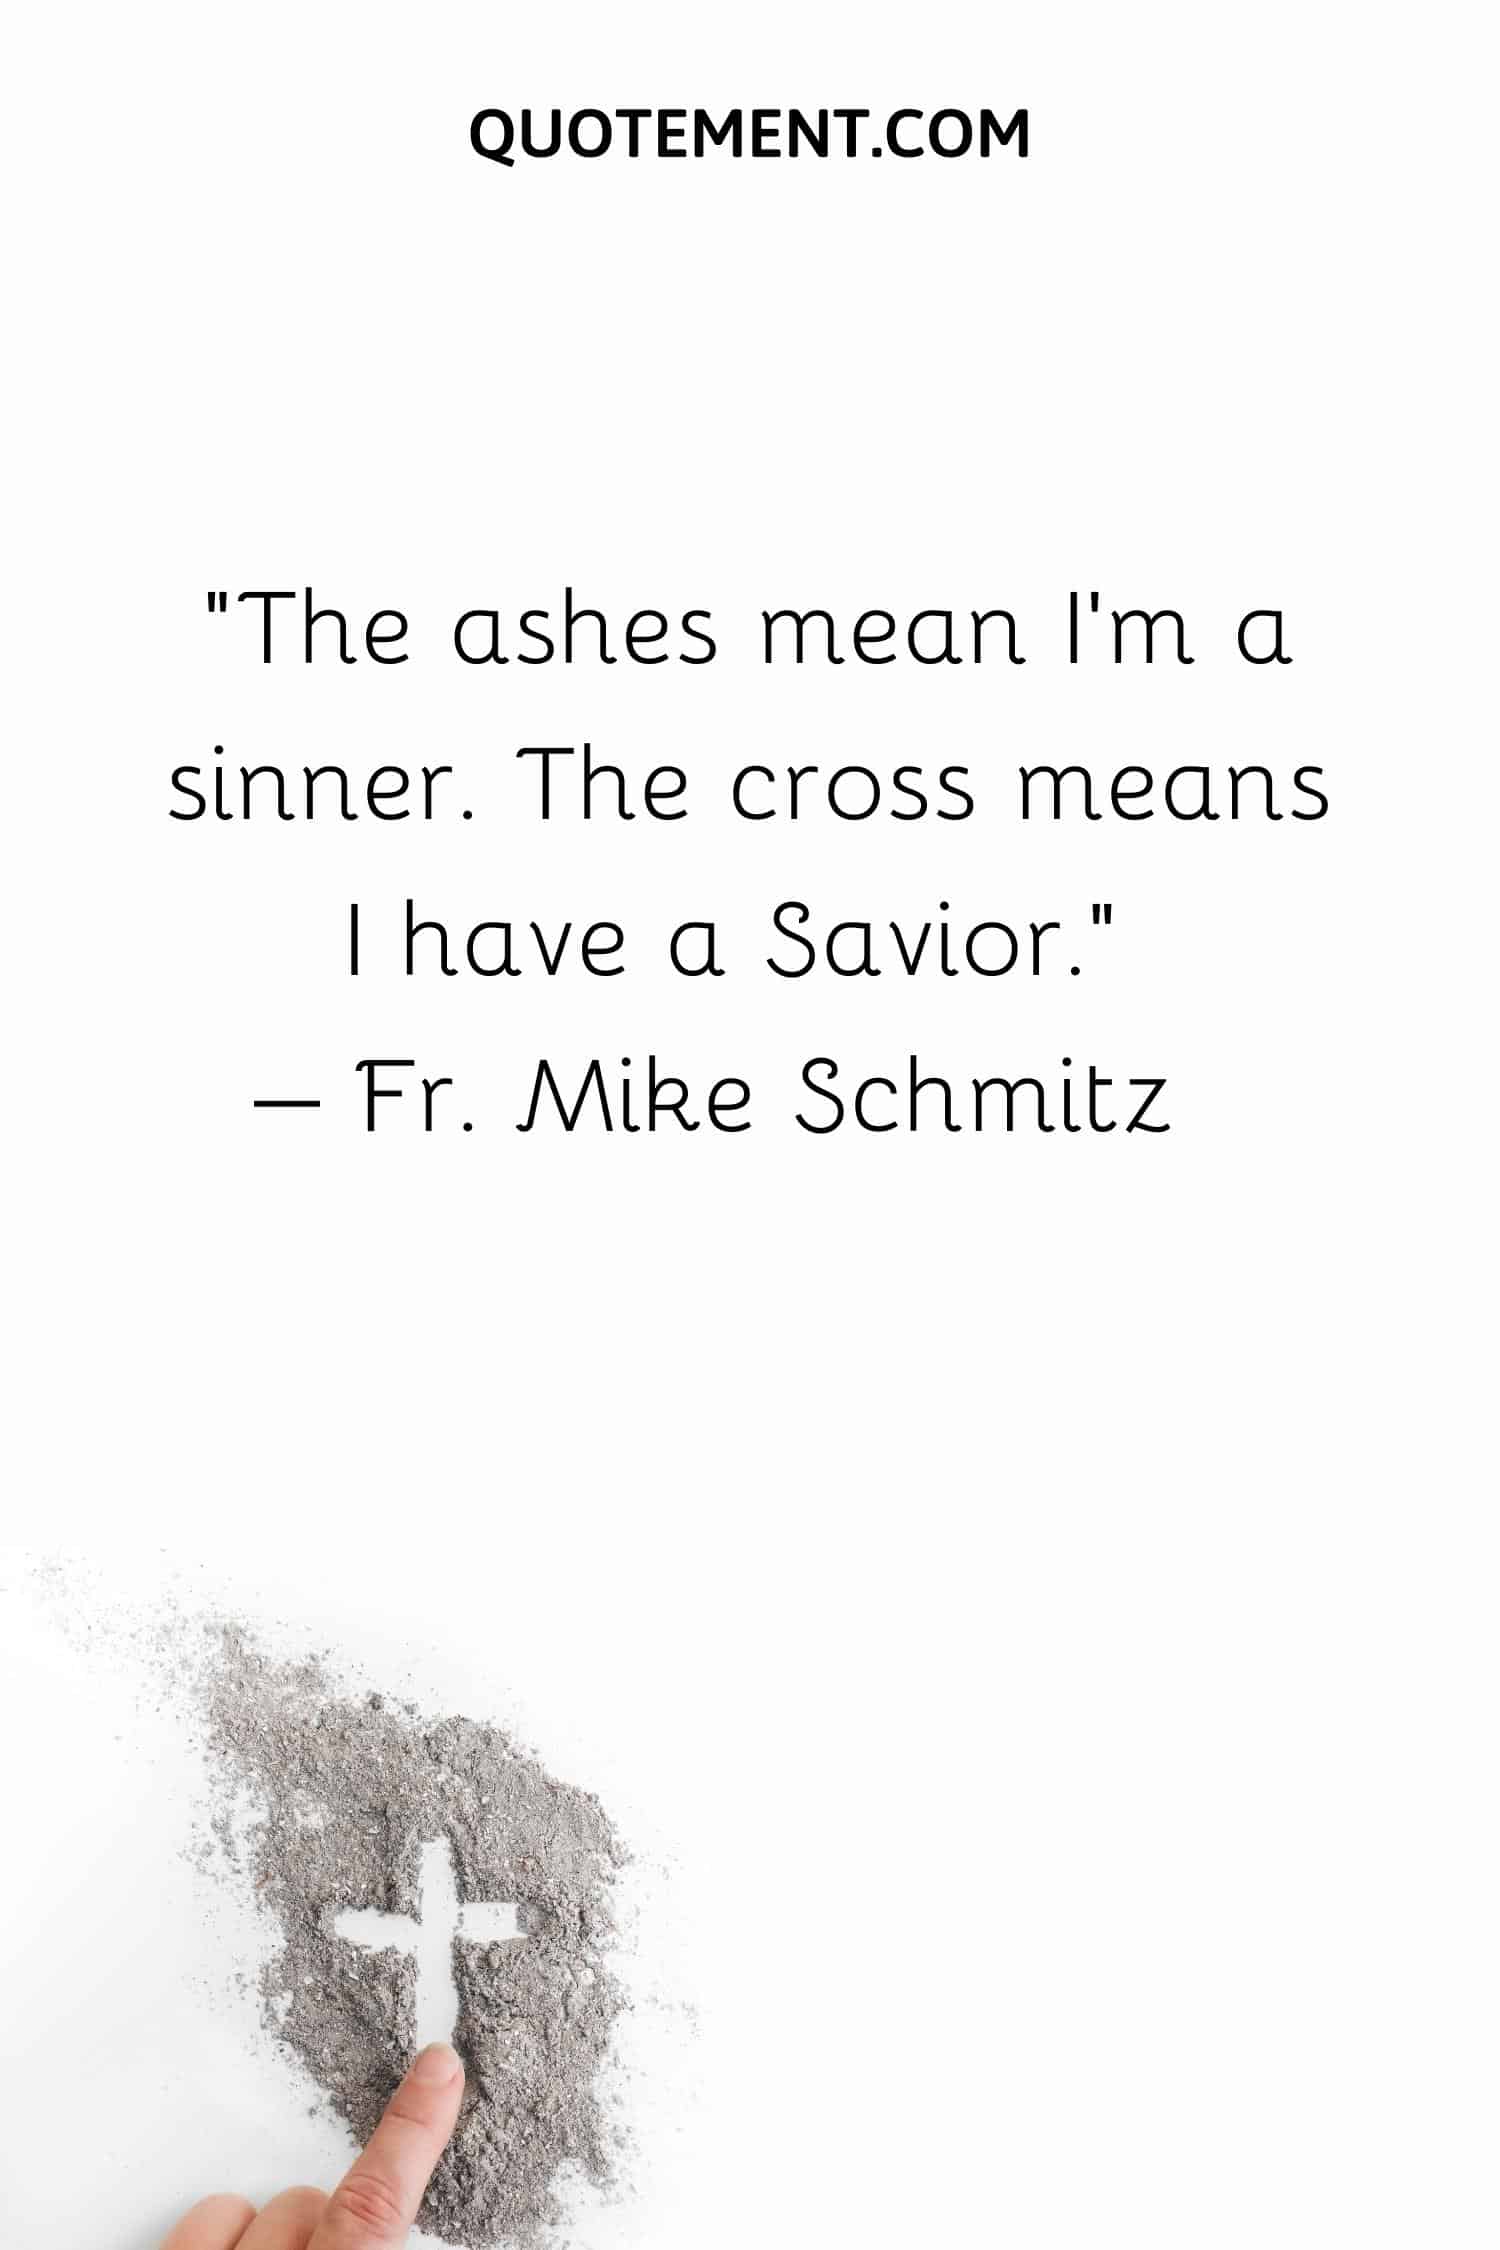 The ashes mean I’m a sinner. The cross means I have a Savior